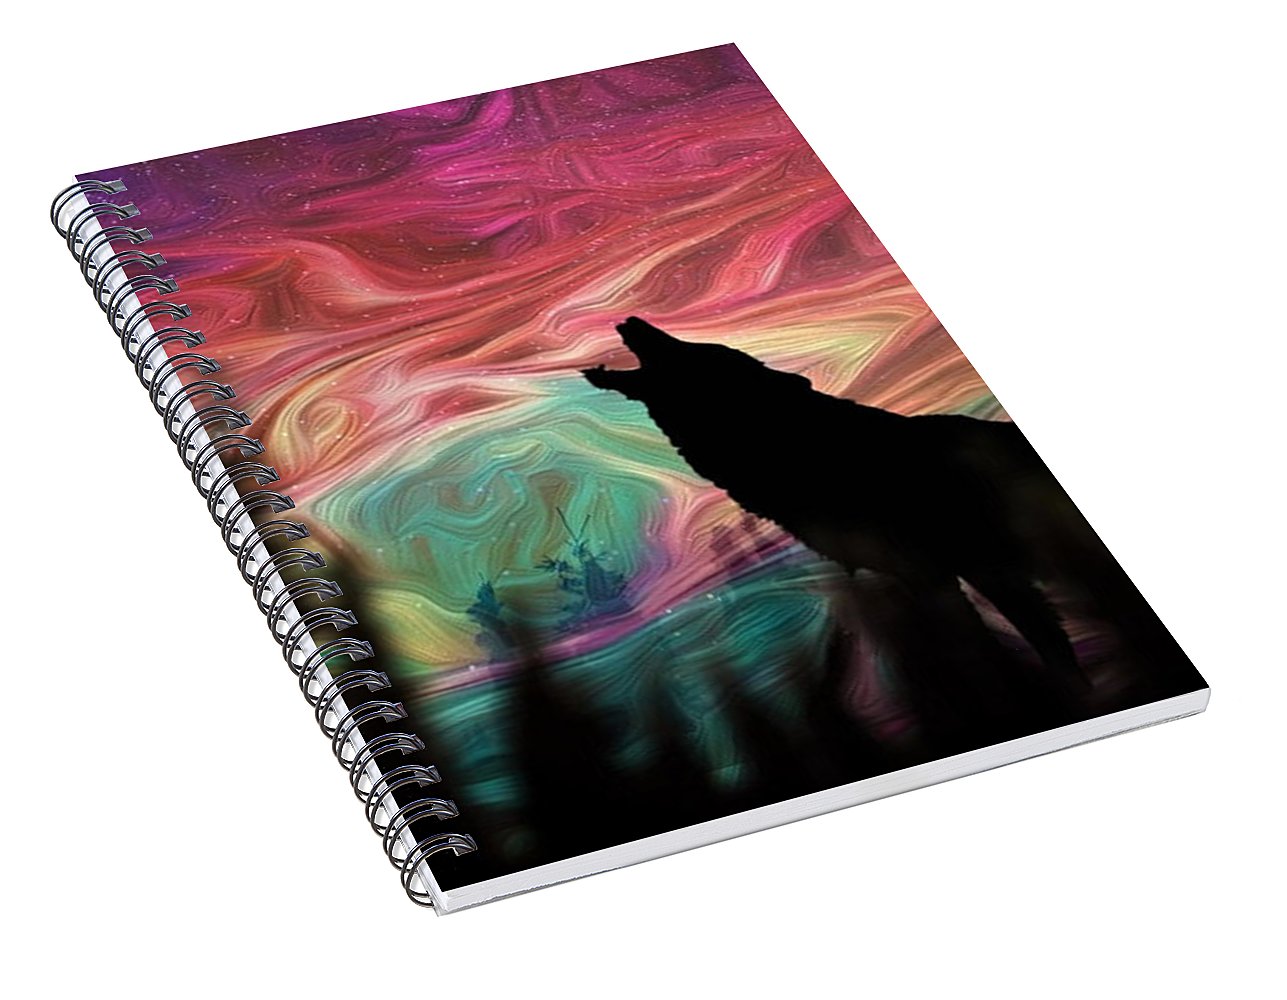 Call of the Wild - Spiral Notebook